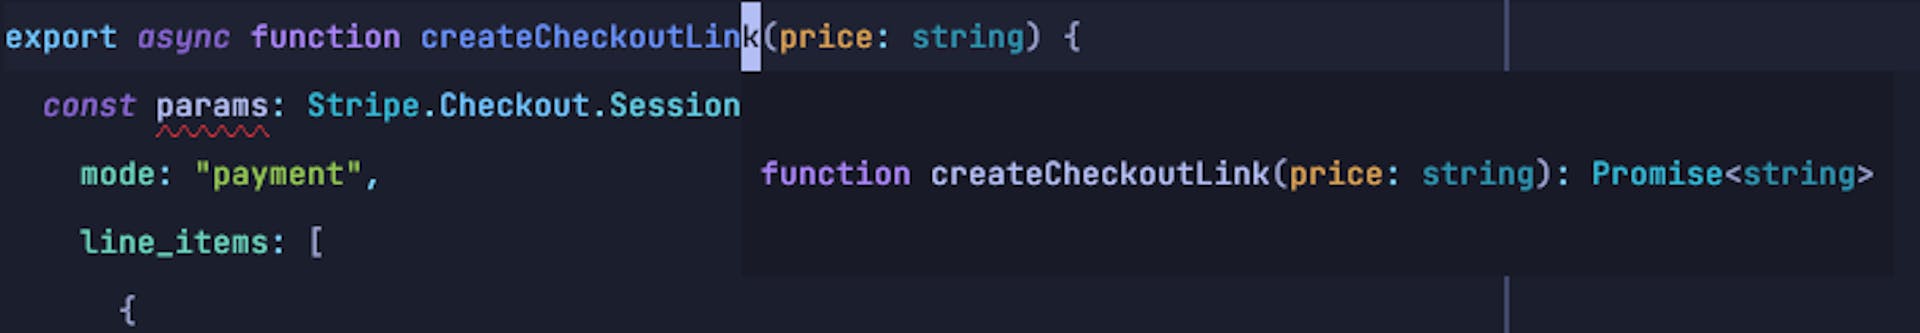 Image of TypeScript definitions for a function and it’s arguments